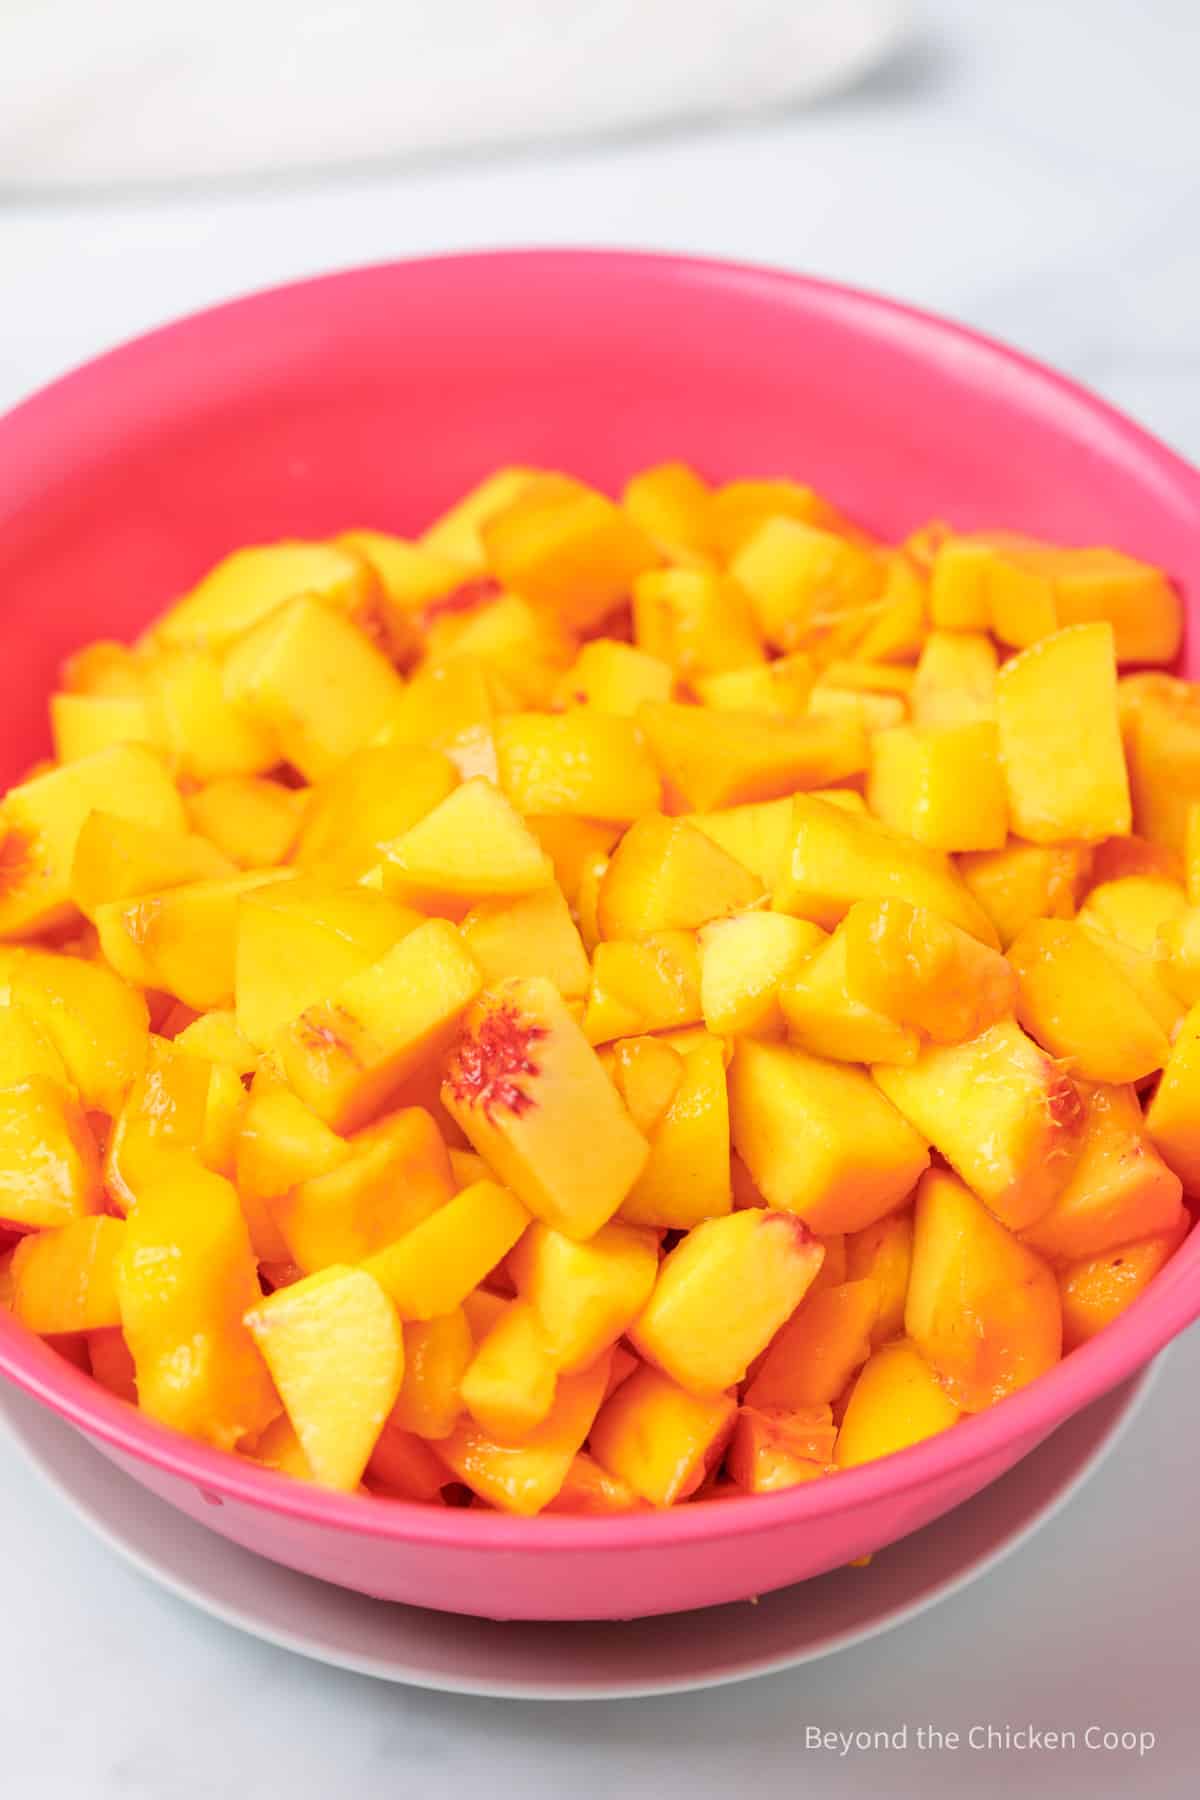 Chopped peaches in a pink collander.